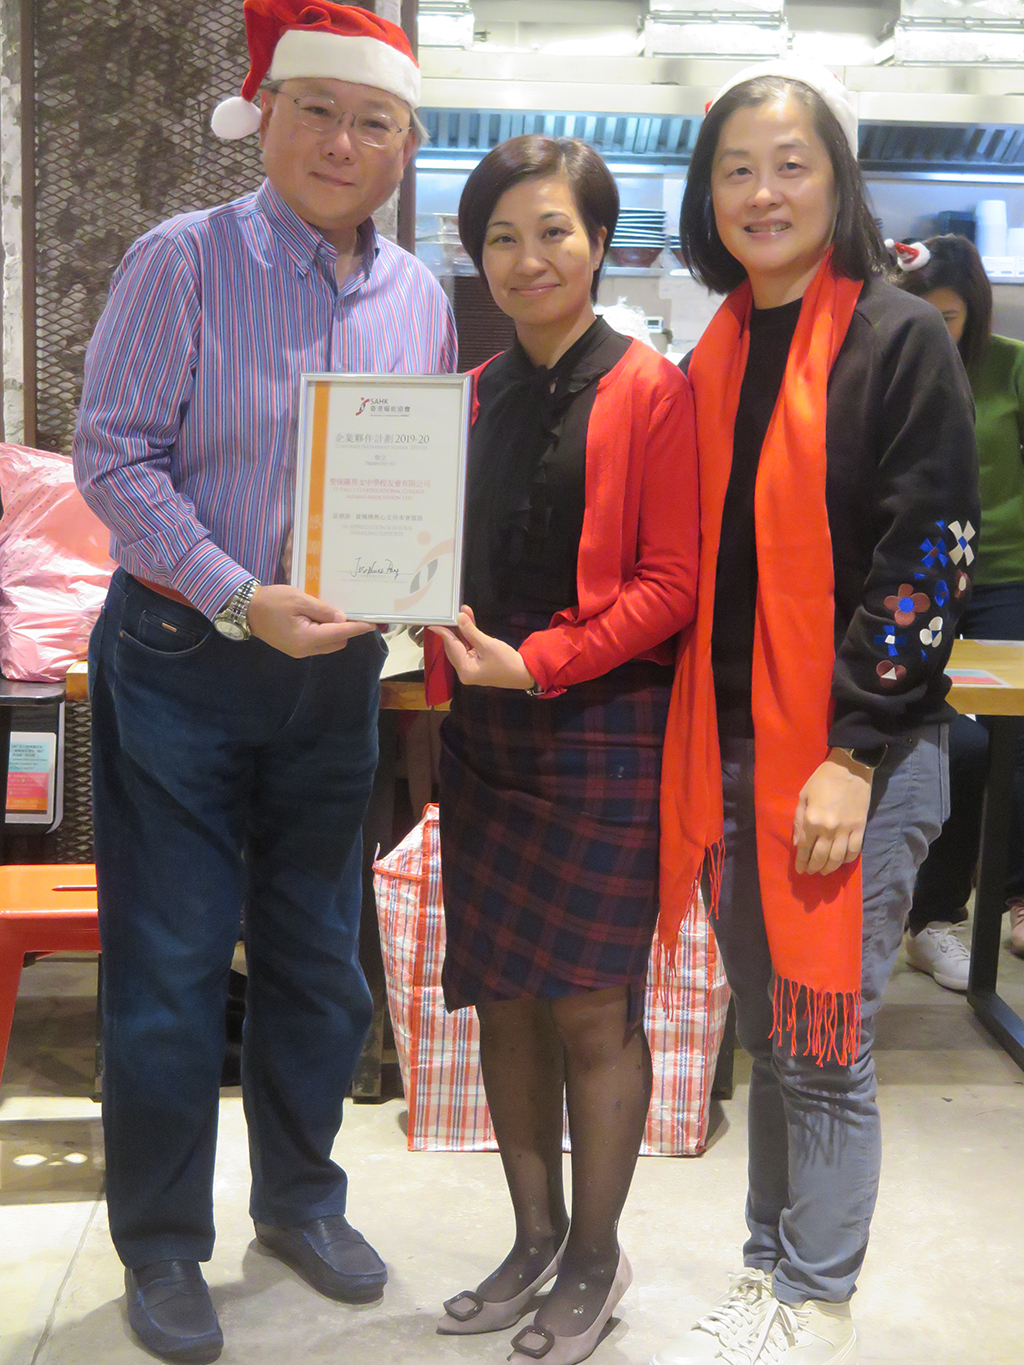 Mr. Andrew W. K. Luk (left), Chairperson of the St. Paul's Co-educational College Alumni Association received certificate from Ms Winnie W. C. Leung (right), Council member of the Association and Mrs. Dawn S. F. Liu (centre), Head of Service (Children and Family Support Service).